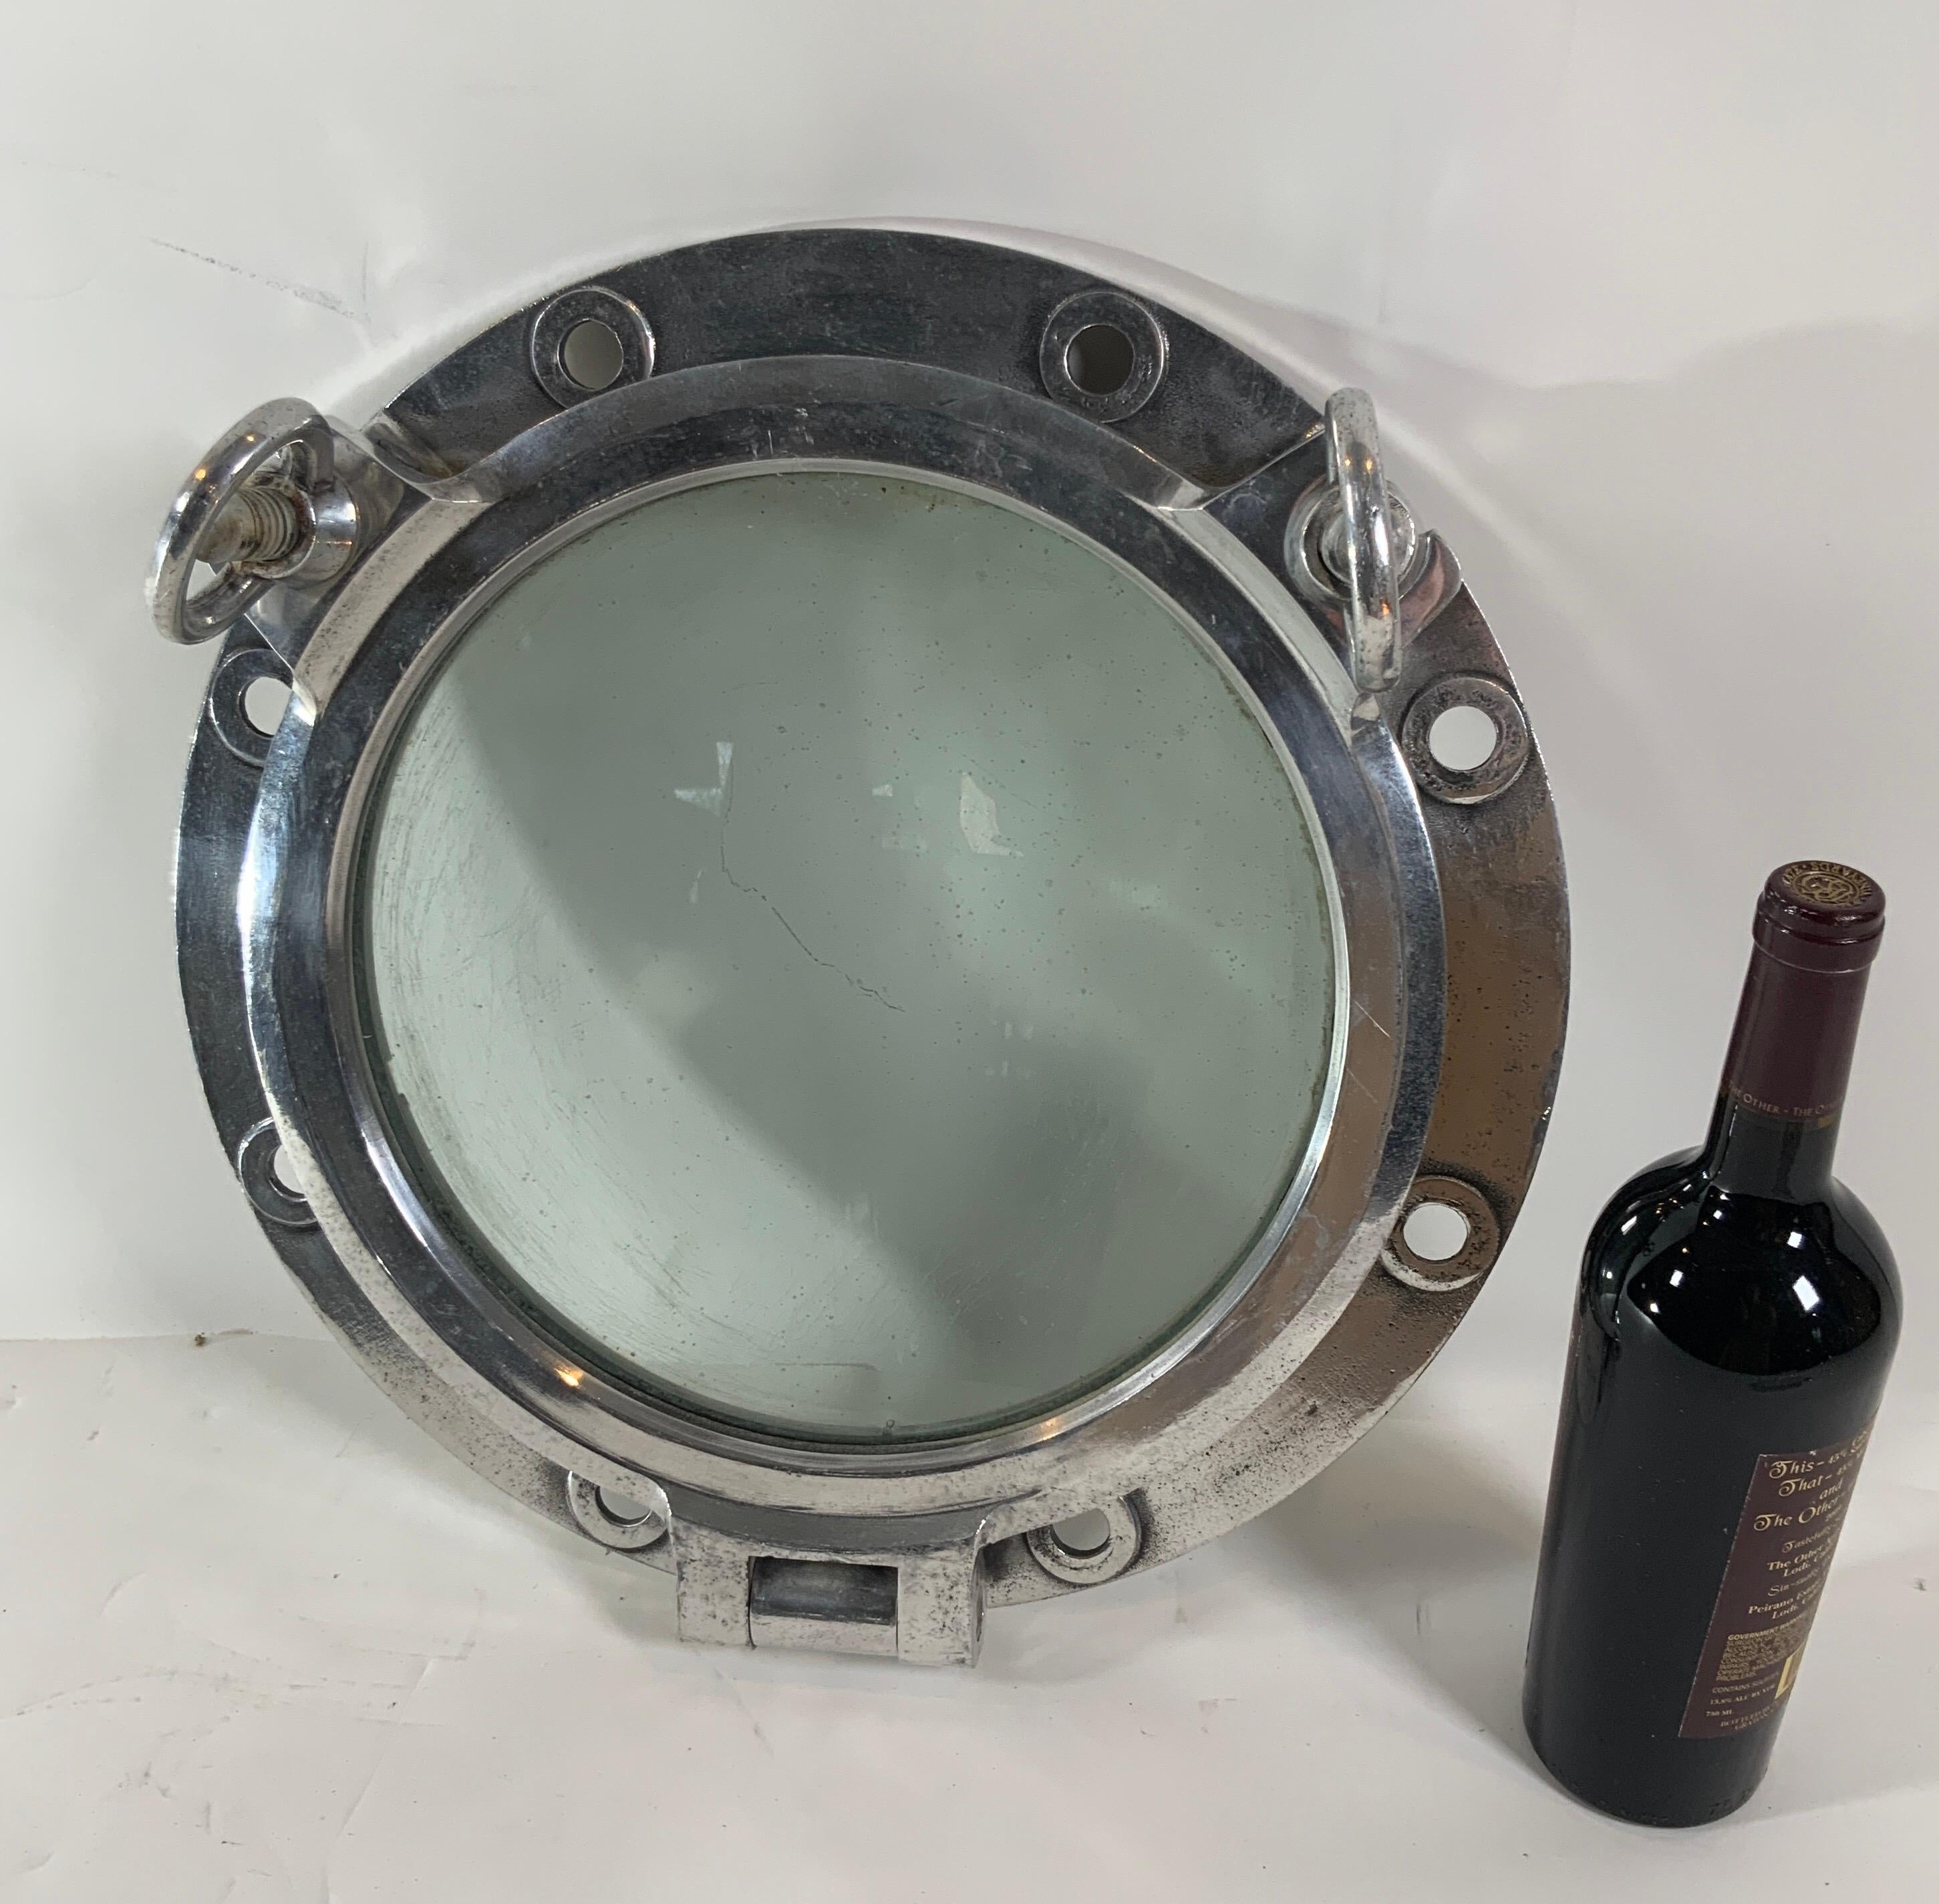 Authentic polished aluminum ship's porthole fitted with a glass window. Door is hinged and fitted with two dogbolts. Highly polished porthole. 

Overall dimensions: glass diameter: 12